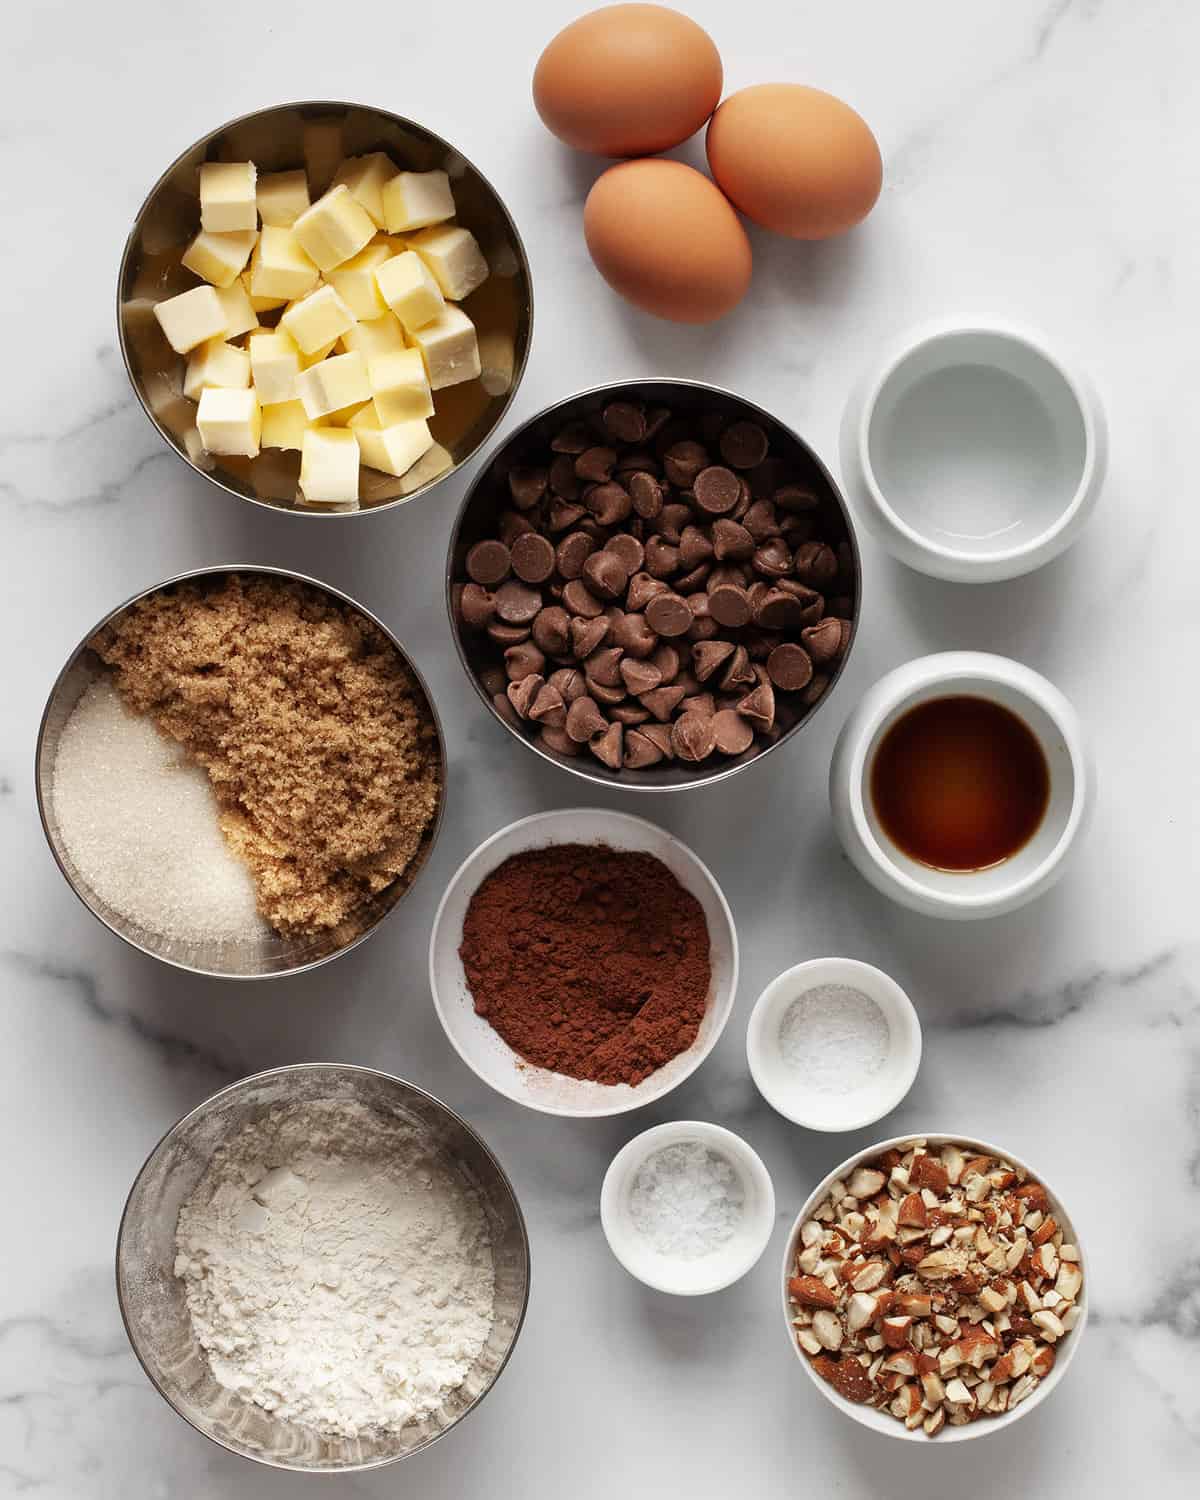 Ingredients including butter, sugars, chocolate chips, cocoa powder, flour, salt and eggs.